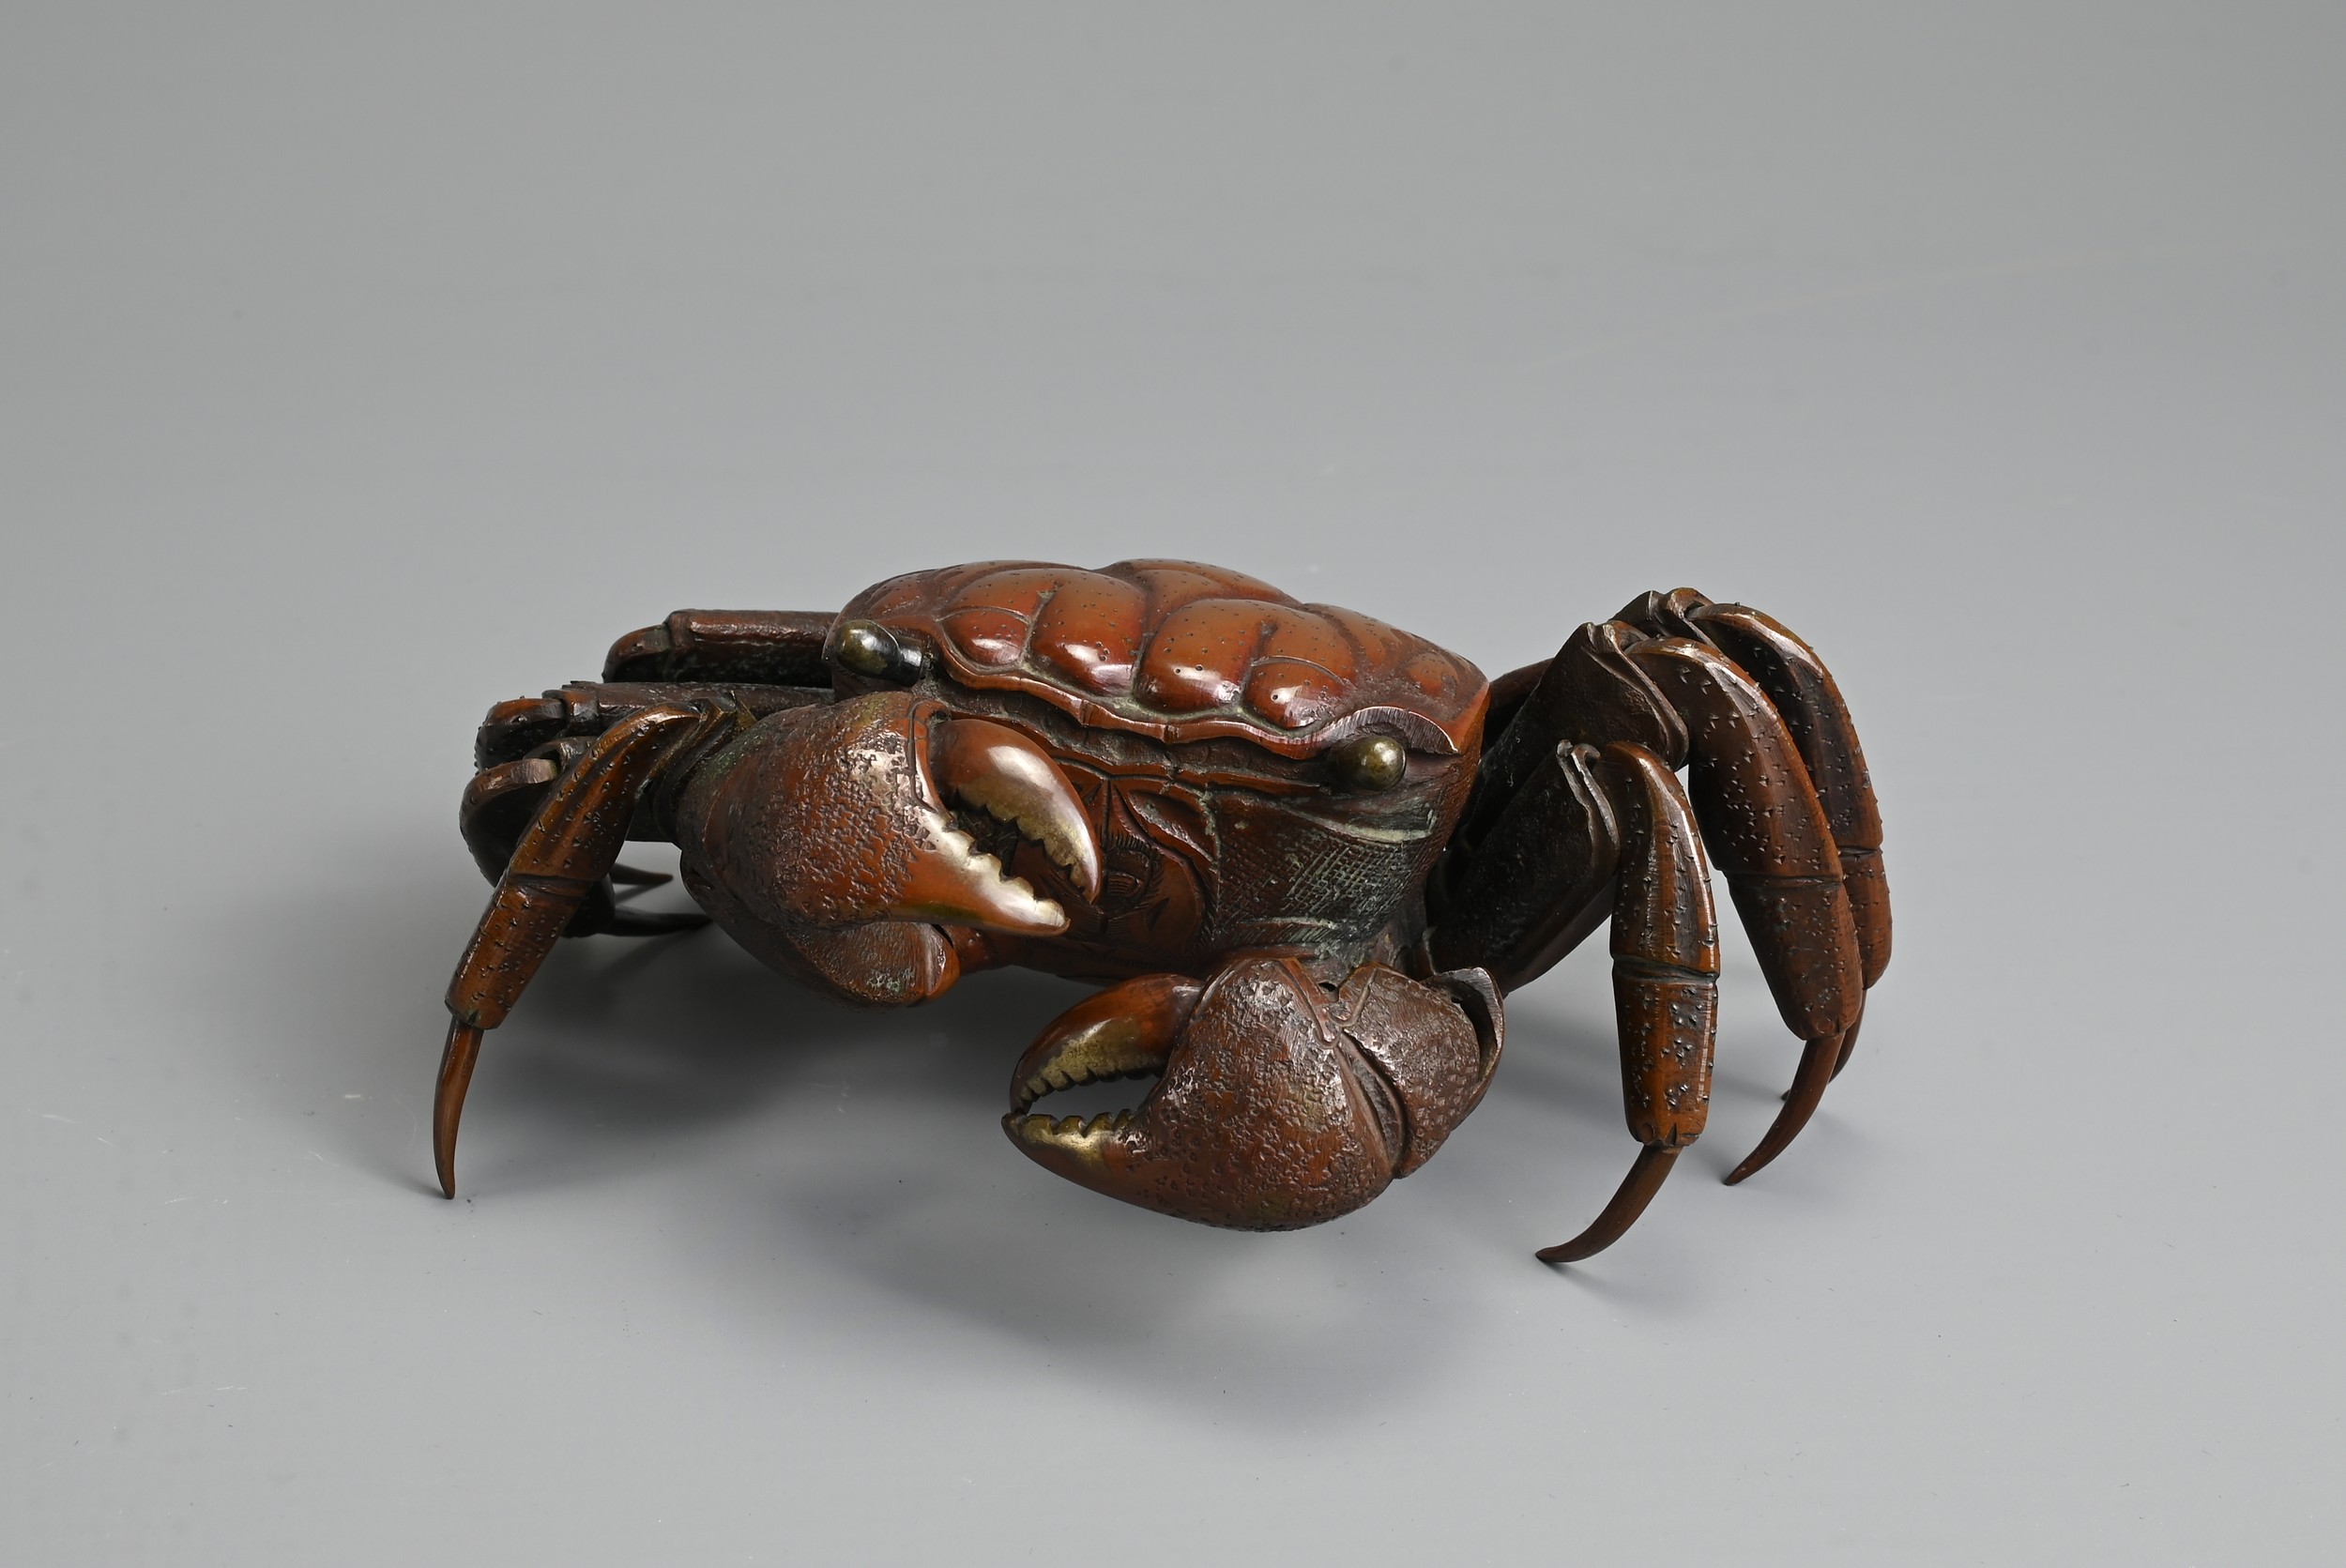 A JAPANESE MEIJI PERIOD (1868-1912) BRONZE JIZAI OKIMONO OF A CRAB. With articulated legs, claws and